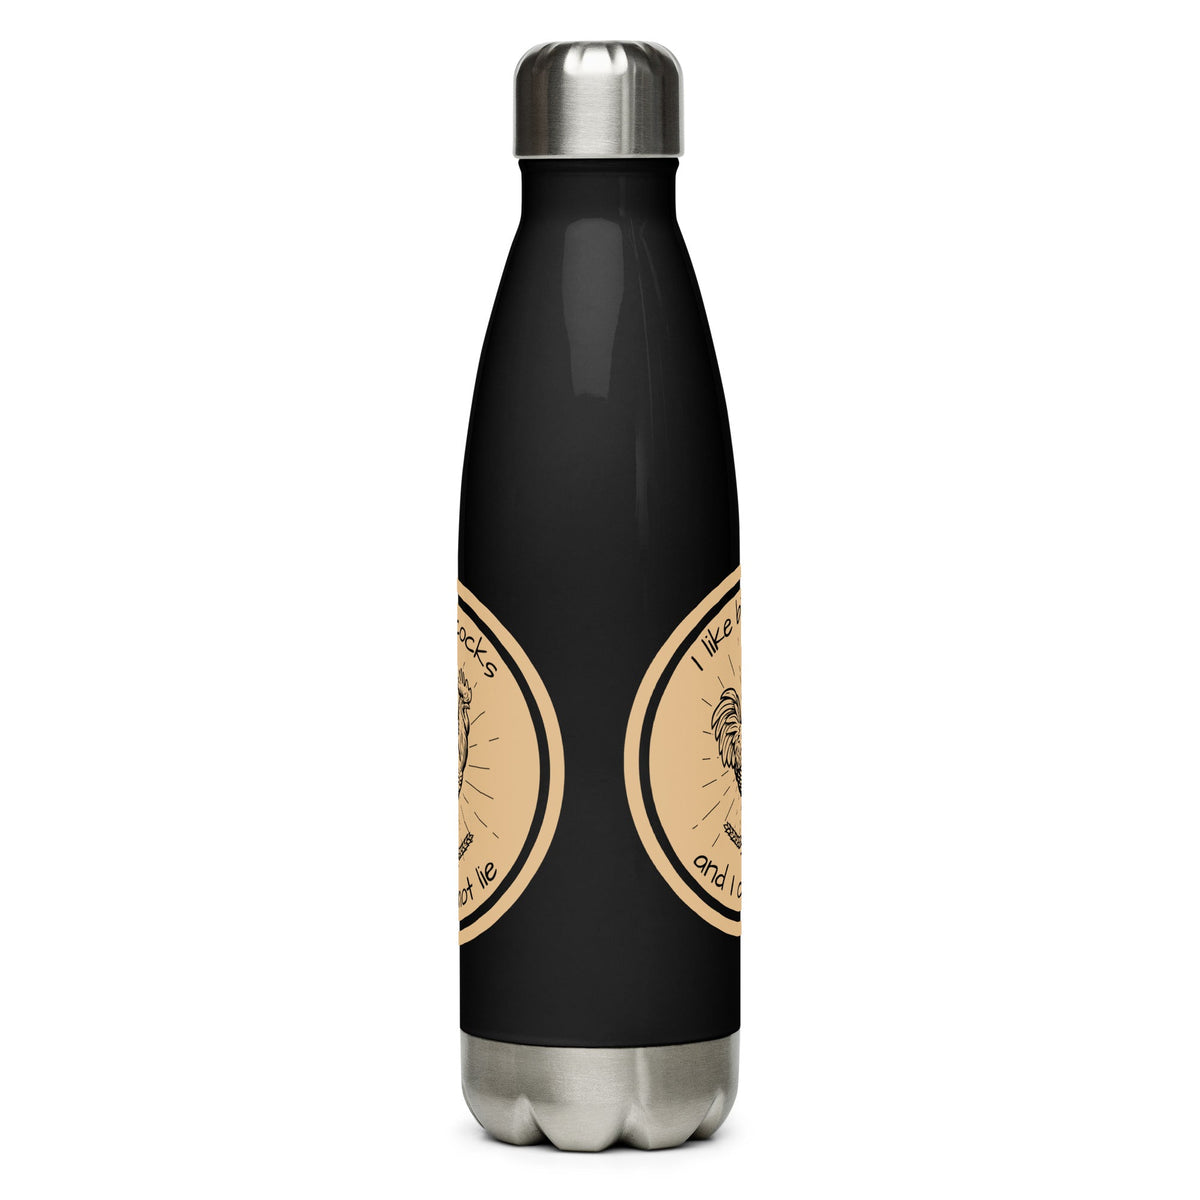 Chicken Big Cocks Stainless Steel Water Bottle - Cluck It All Farms